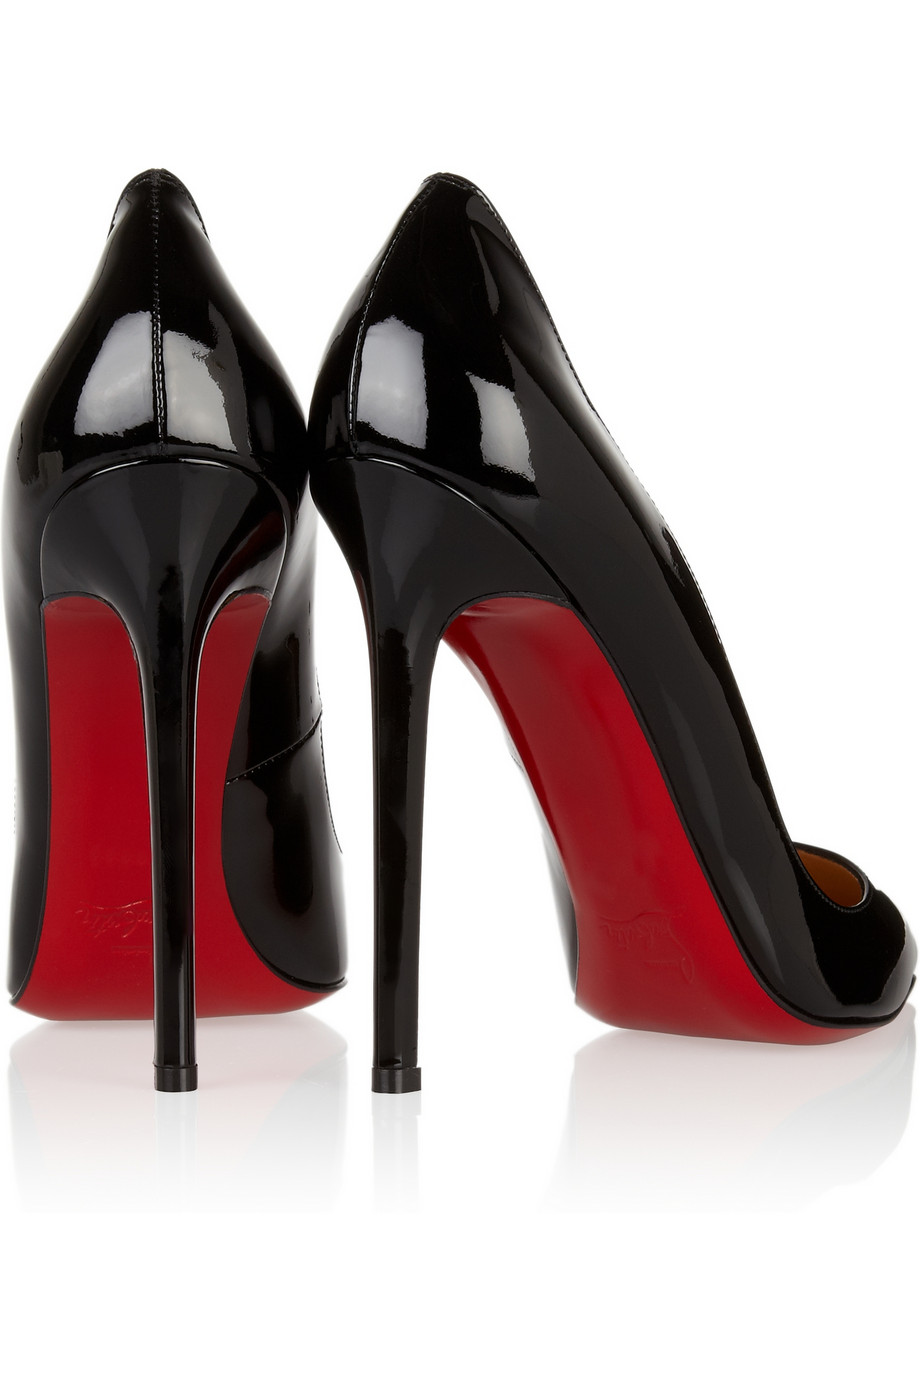 Christian Louboutin The Pigalle 120 Patent-Leather Pumps in Black - Lyst